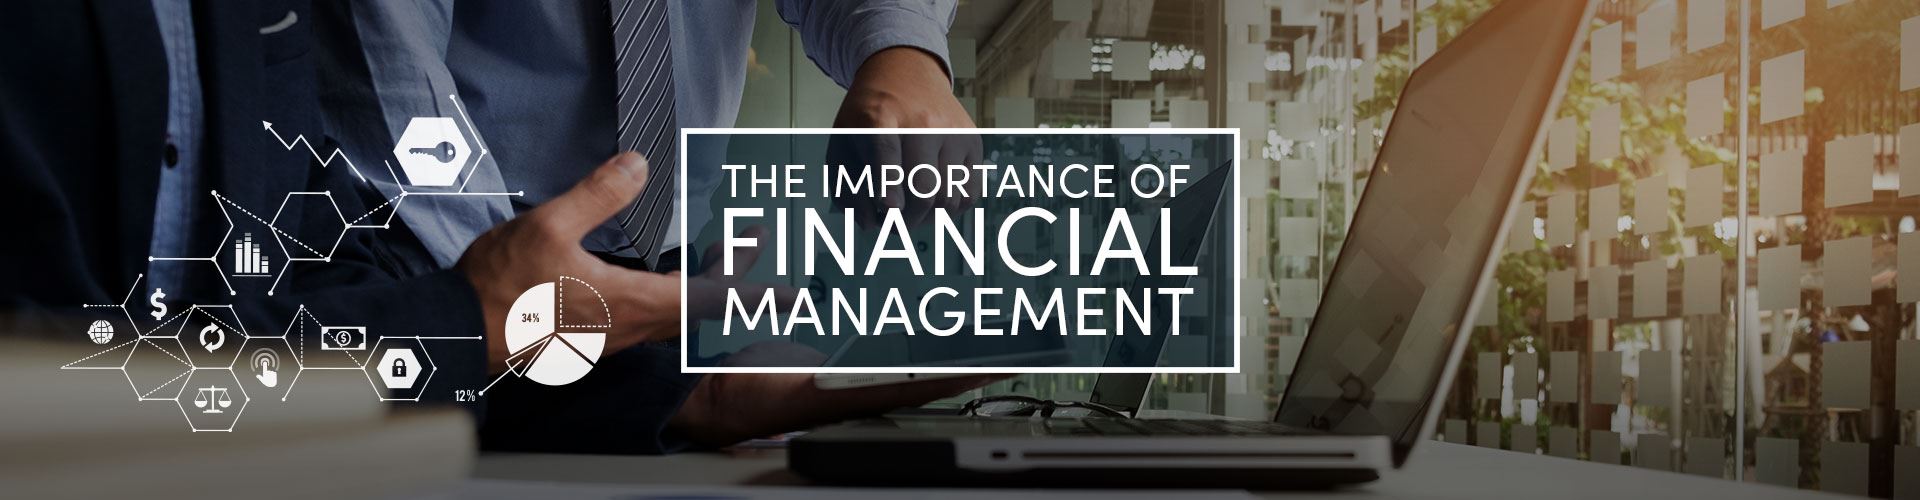 The Importance of Financial Management